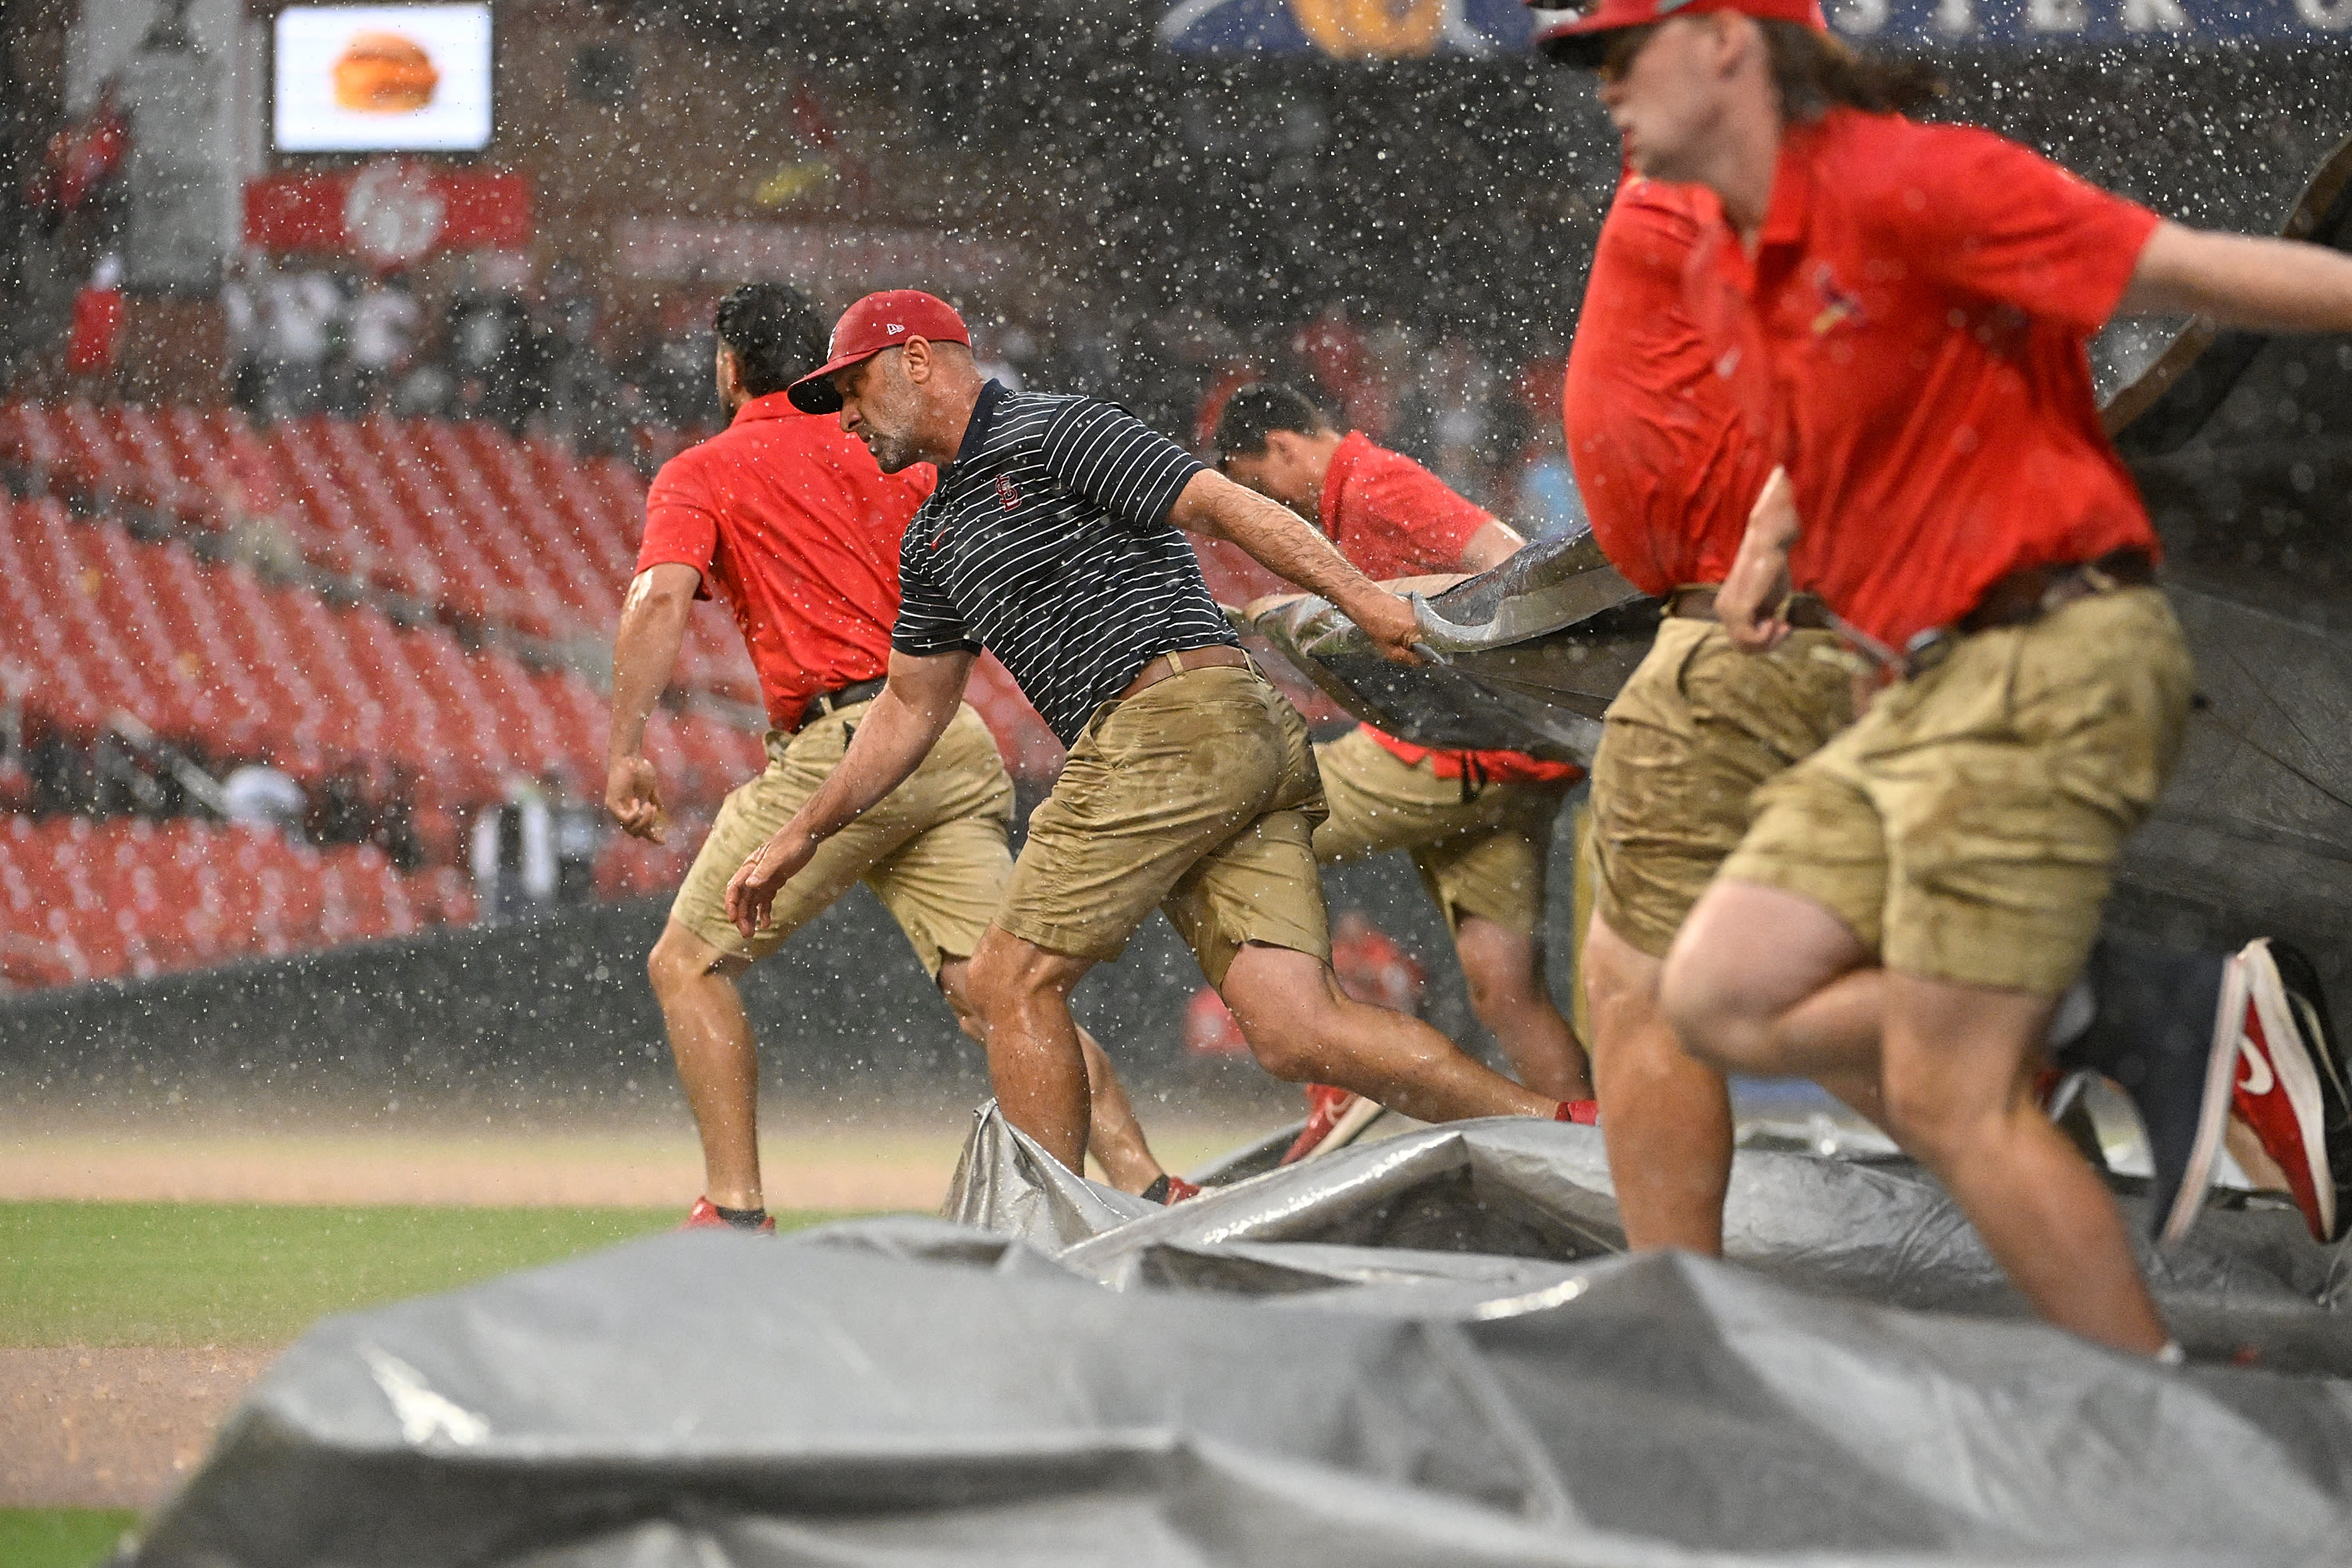 Friday's Cubs-Cardinals remains in rain delay. Here's estimated first pitch